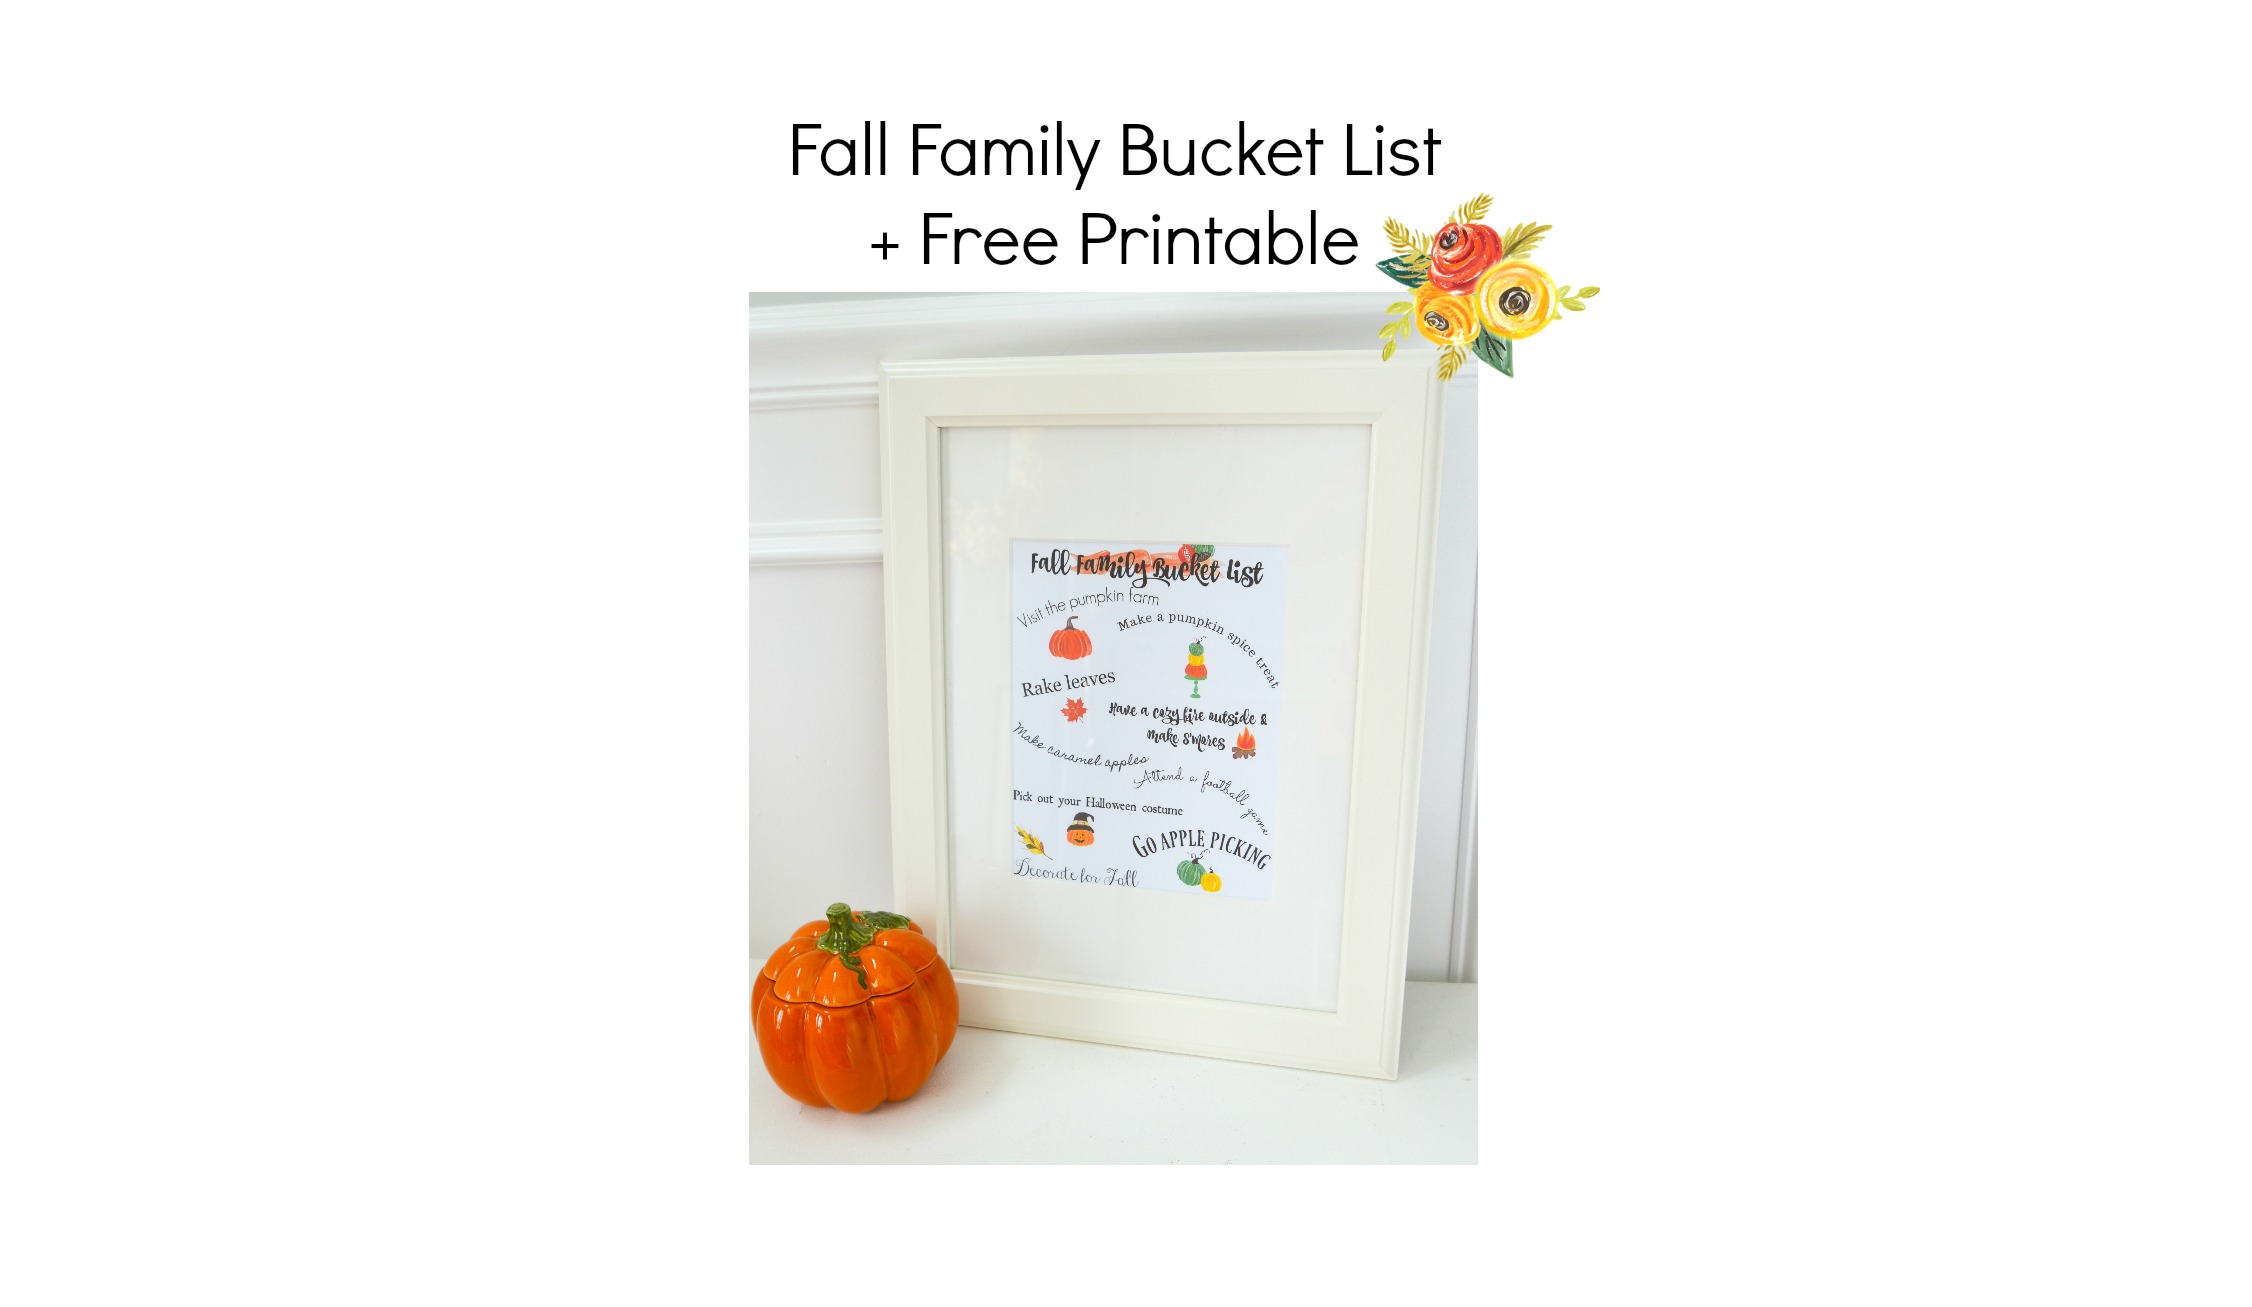 Celebrate in detail.com - Fall bucket list free printable